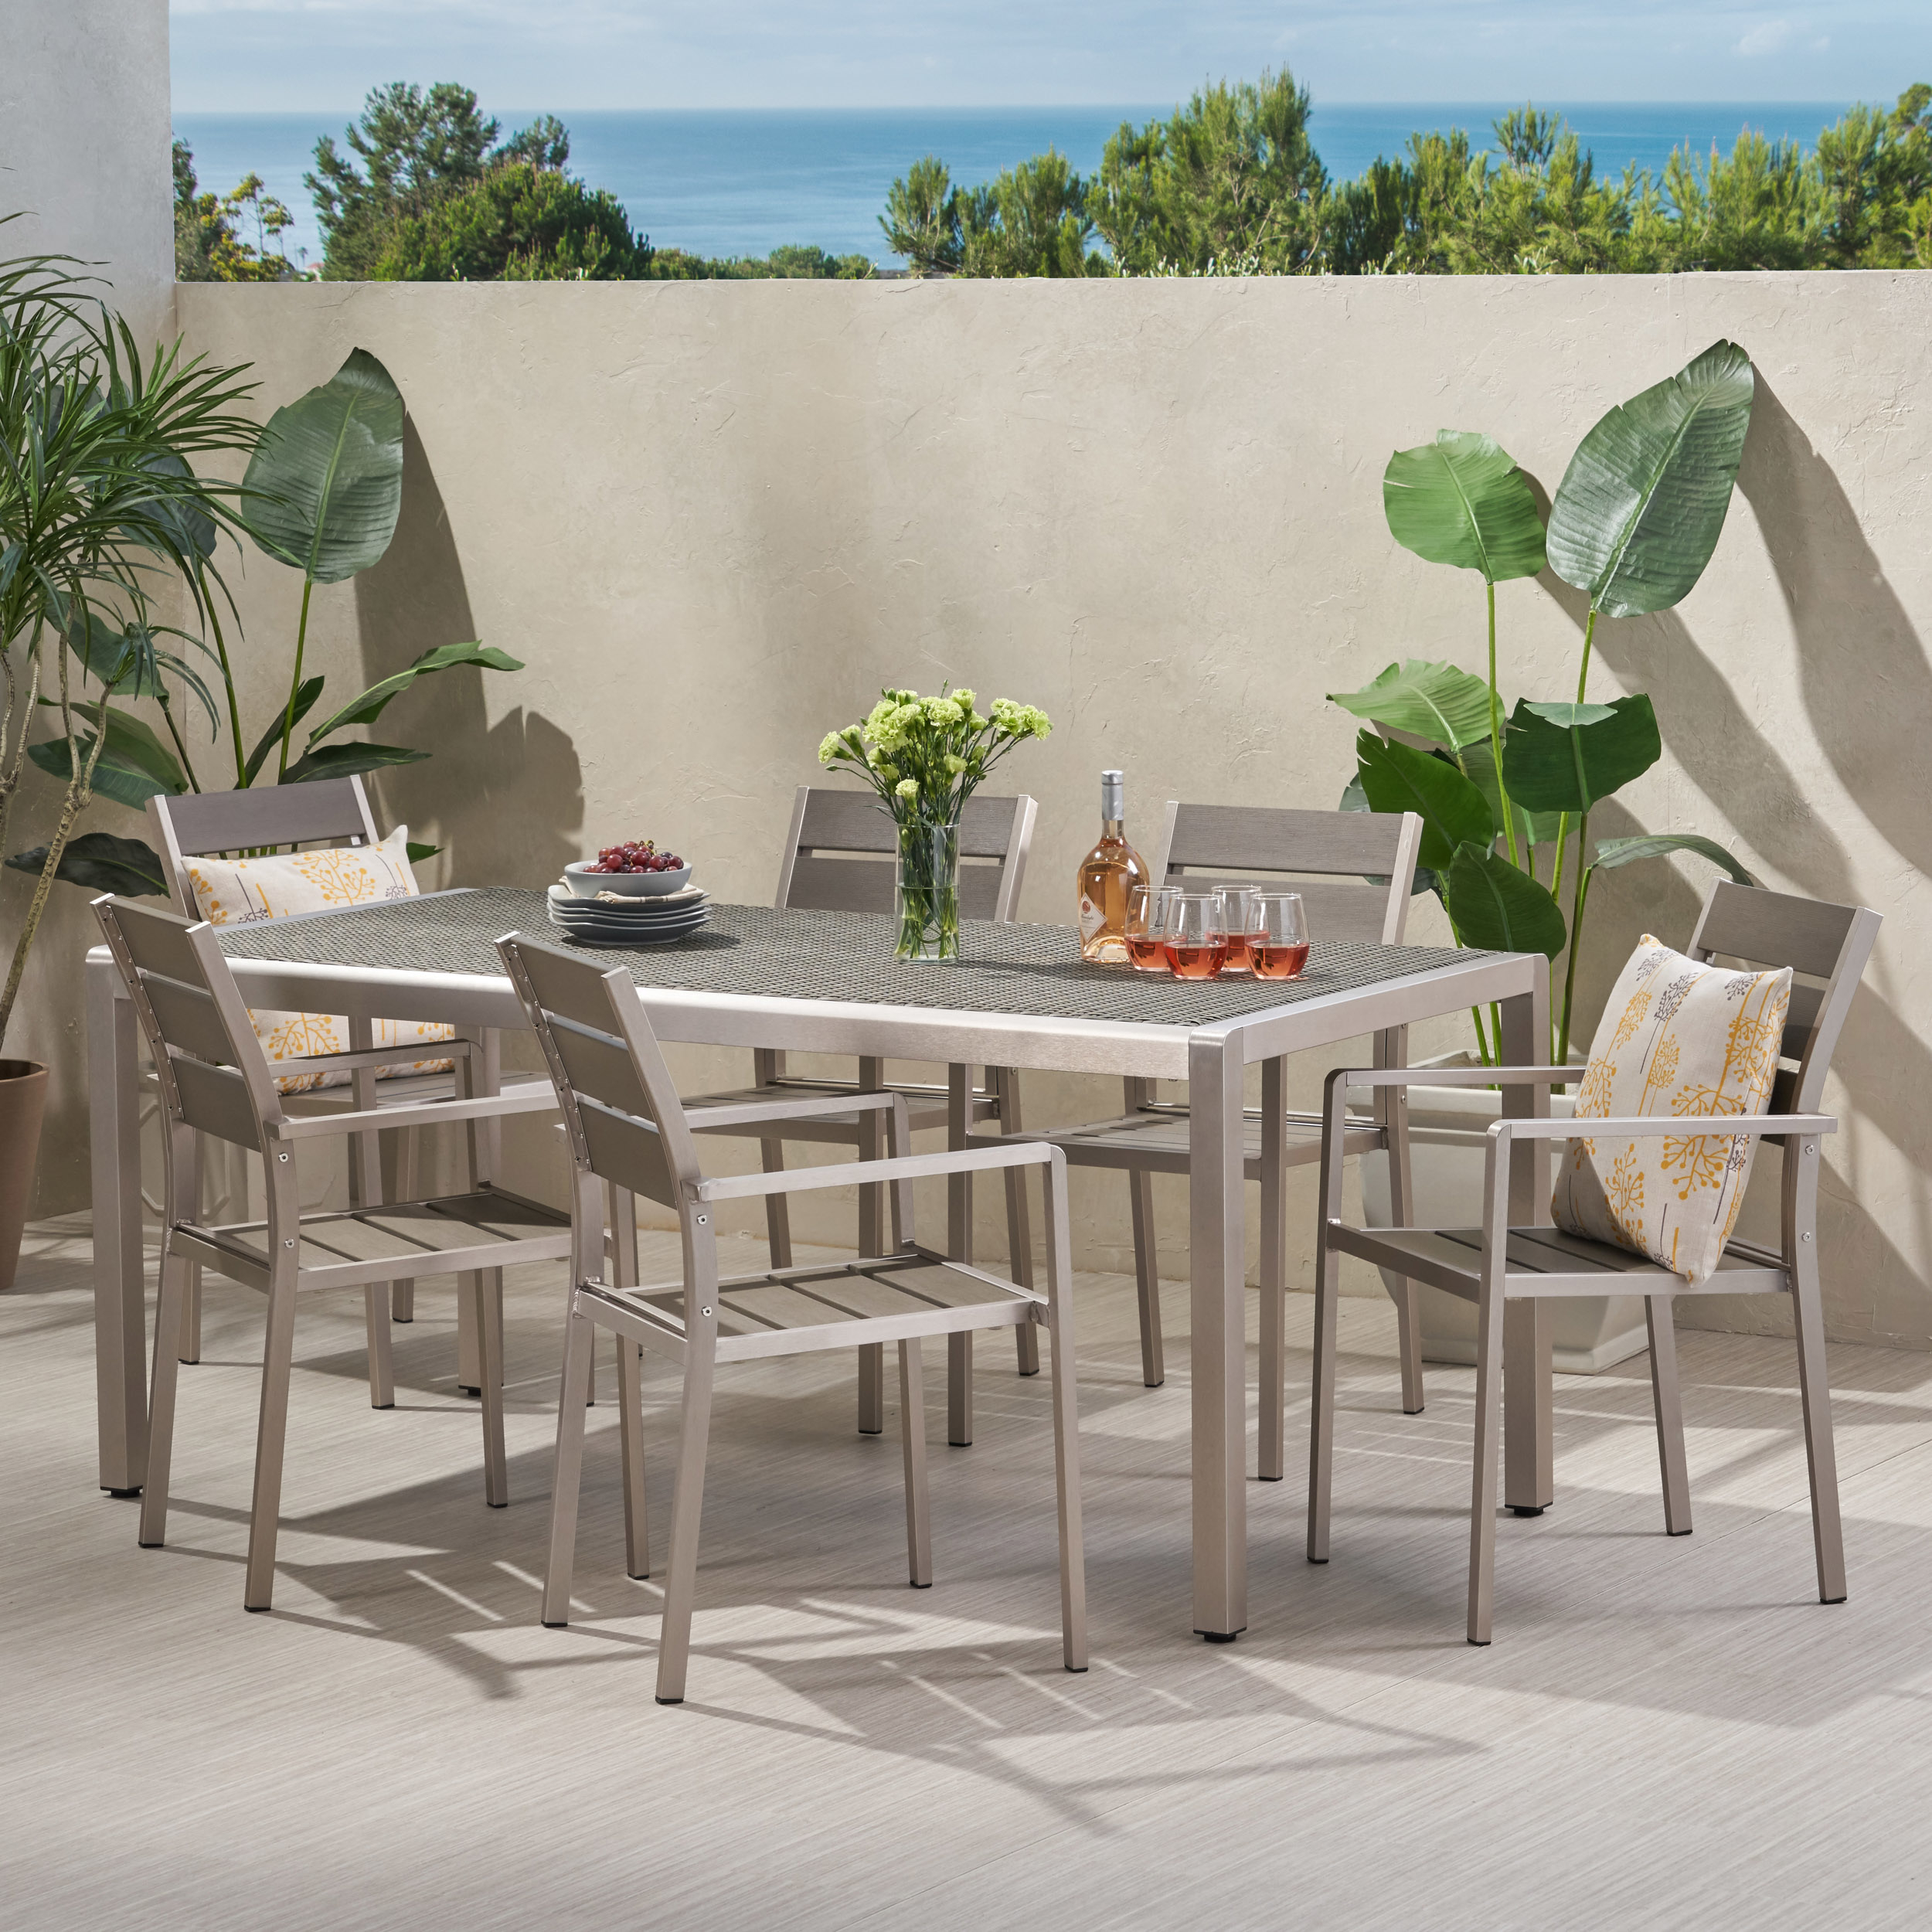 Eleanore Outdoor Modern Aluminum 6 Seater Dining Set With Faux Wood Seats - Gray + Silver